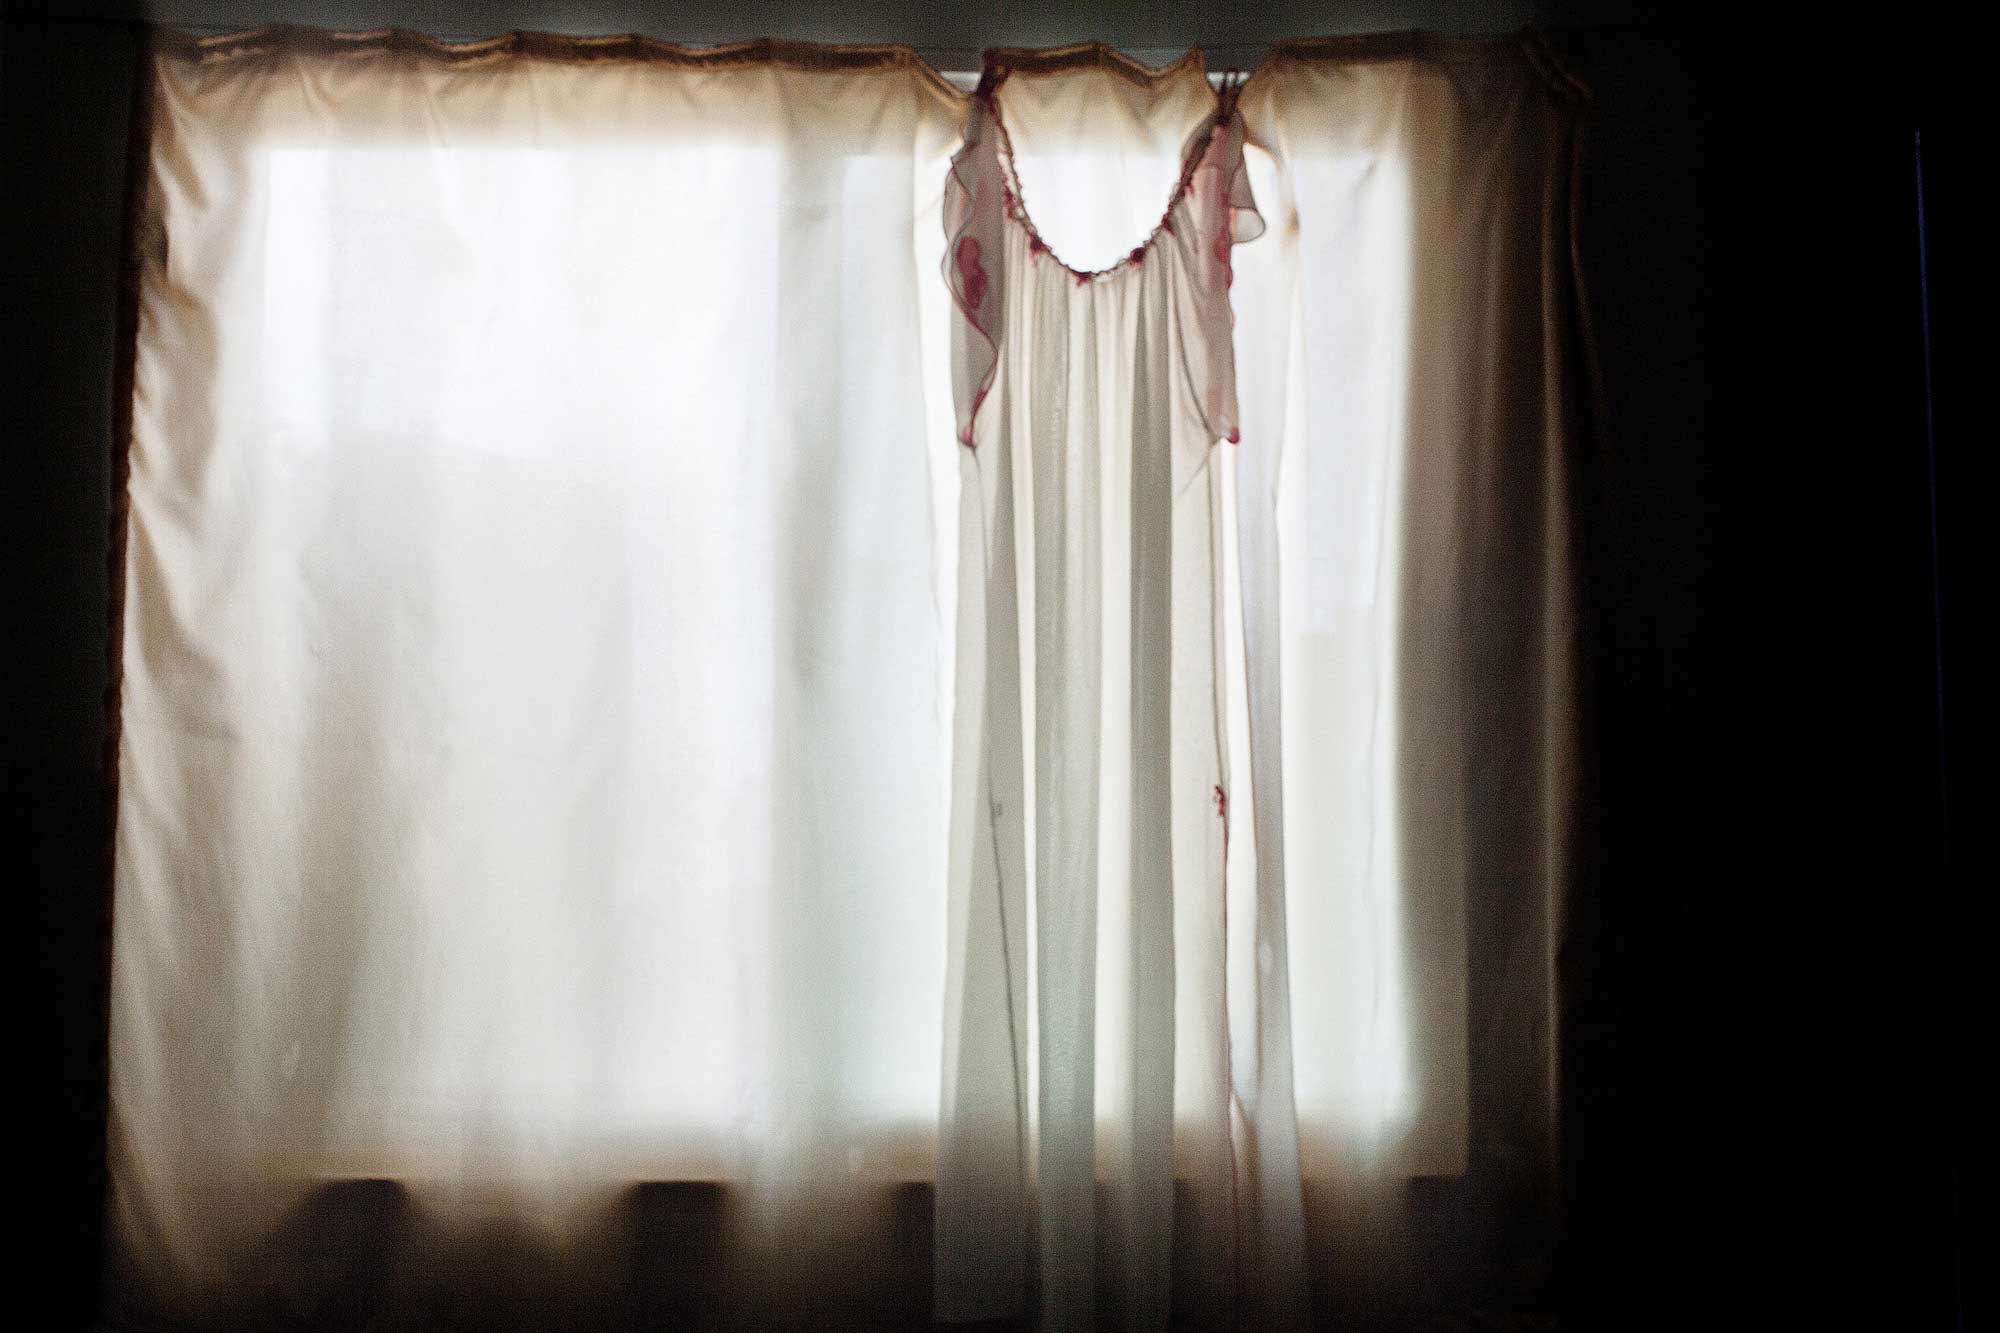 Nadia, 25, lives with 17 displaced family members in a two-bedroom apartment. Above, hangs her mother-in-law’s lingerie, one of her only intimate items smuggled from Syria, which she offered to share with Nadia if her son returns from the front lines.